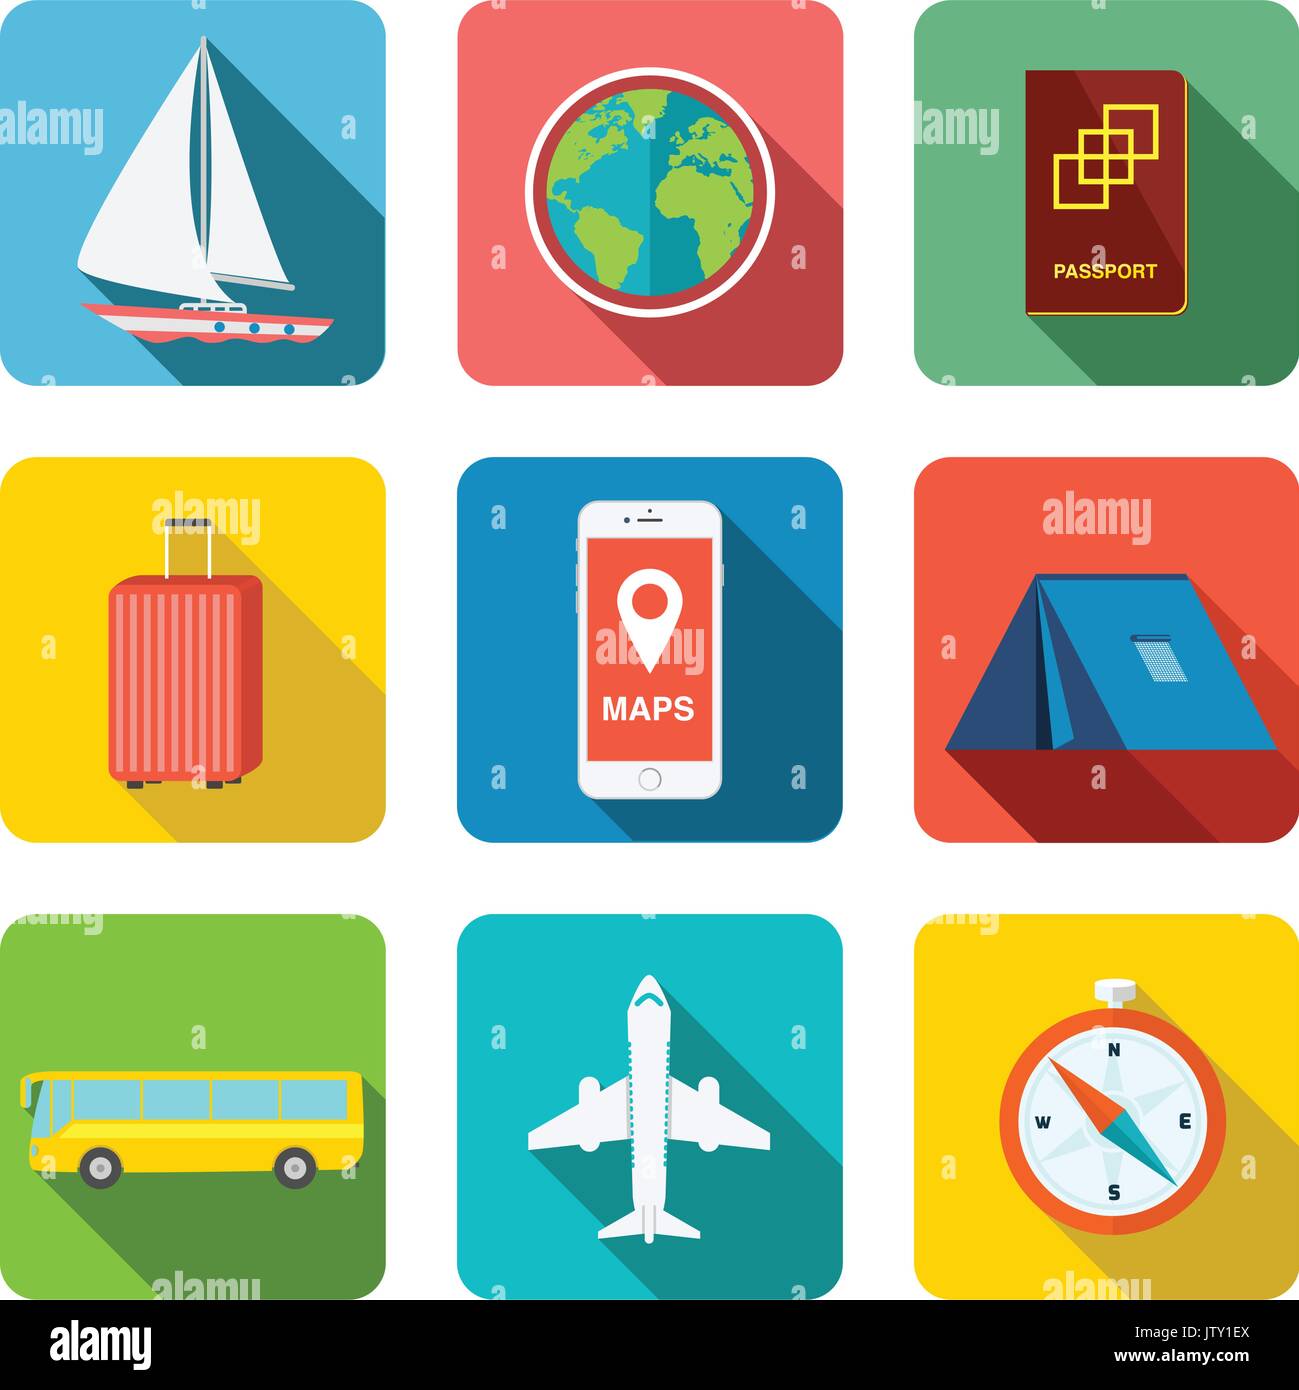 Travel icon set. It contains boat, globe, passport, luggage, mobile map, tent, yurt, bus, plane, and compass. All these flat icons are drawn very deta Stock Vector